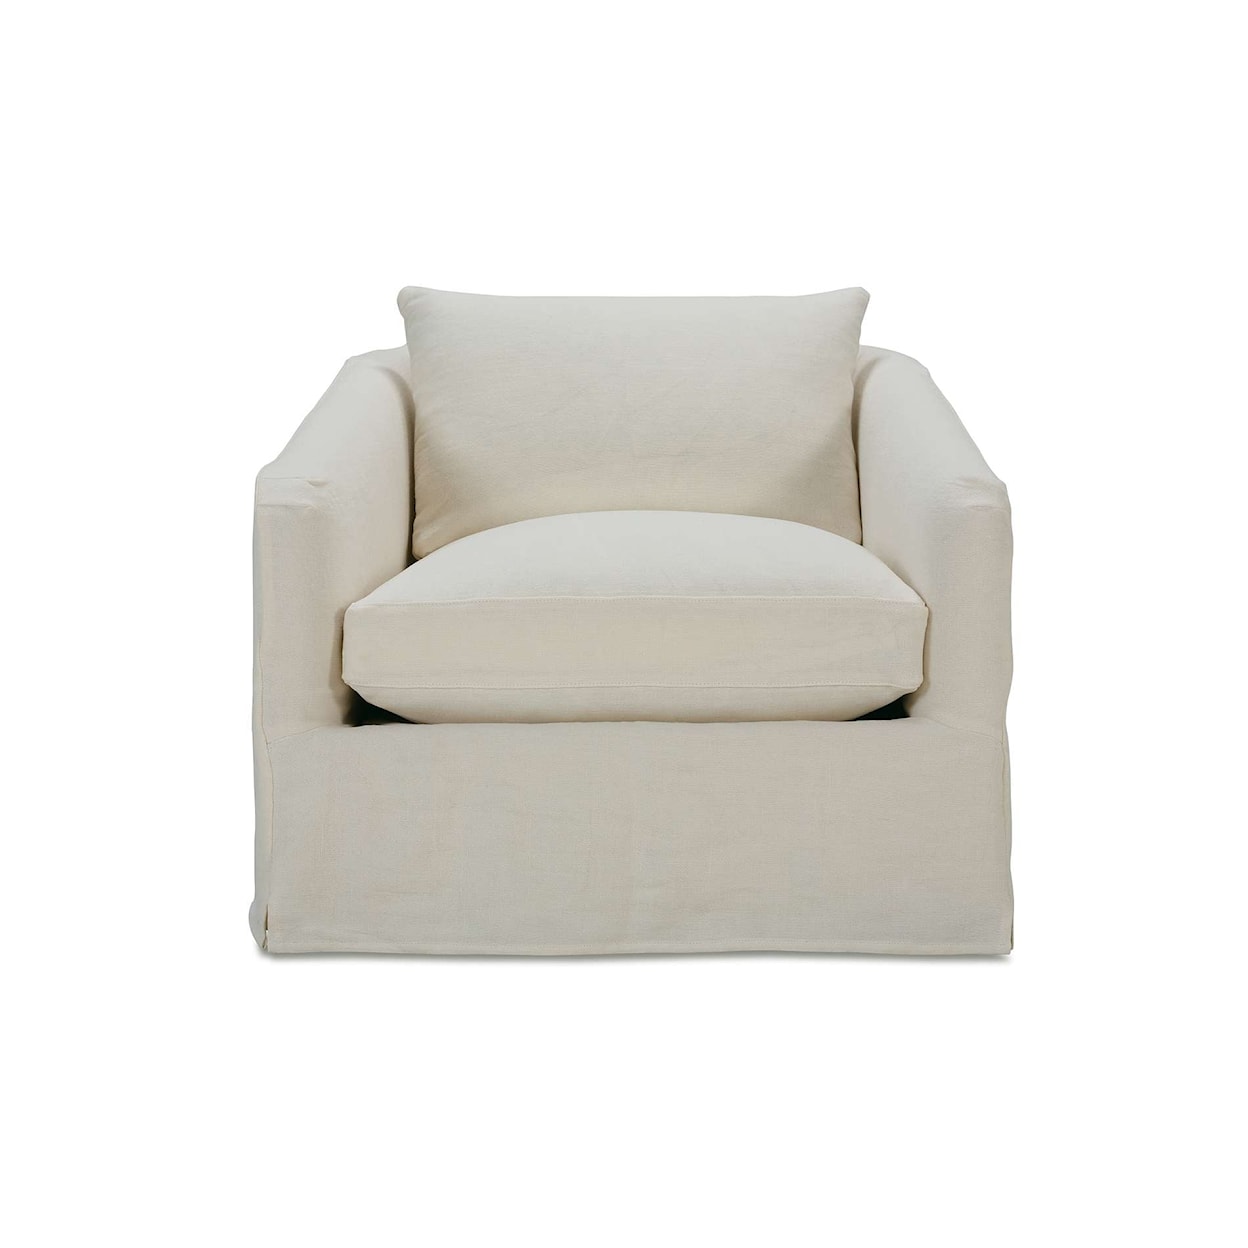 Robin Bruce Florence Slipcover Chair